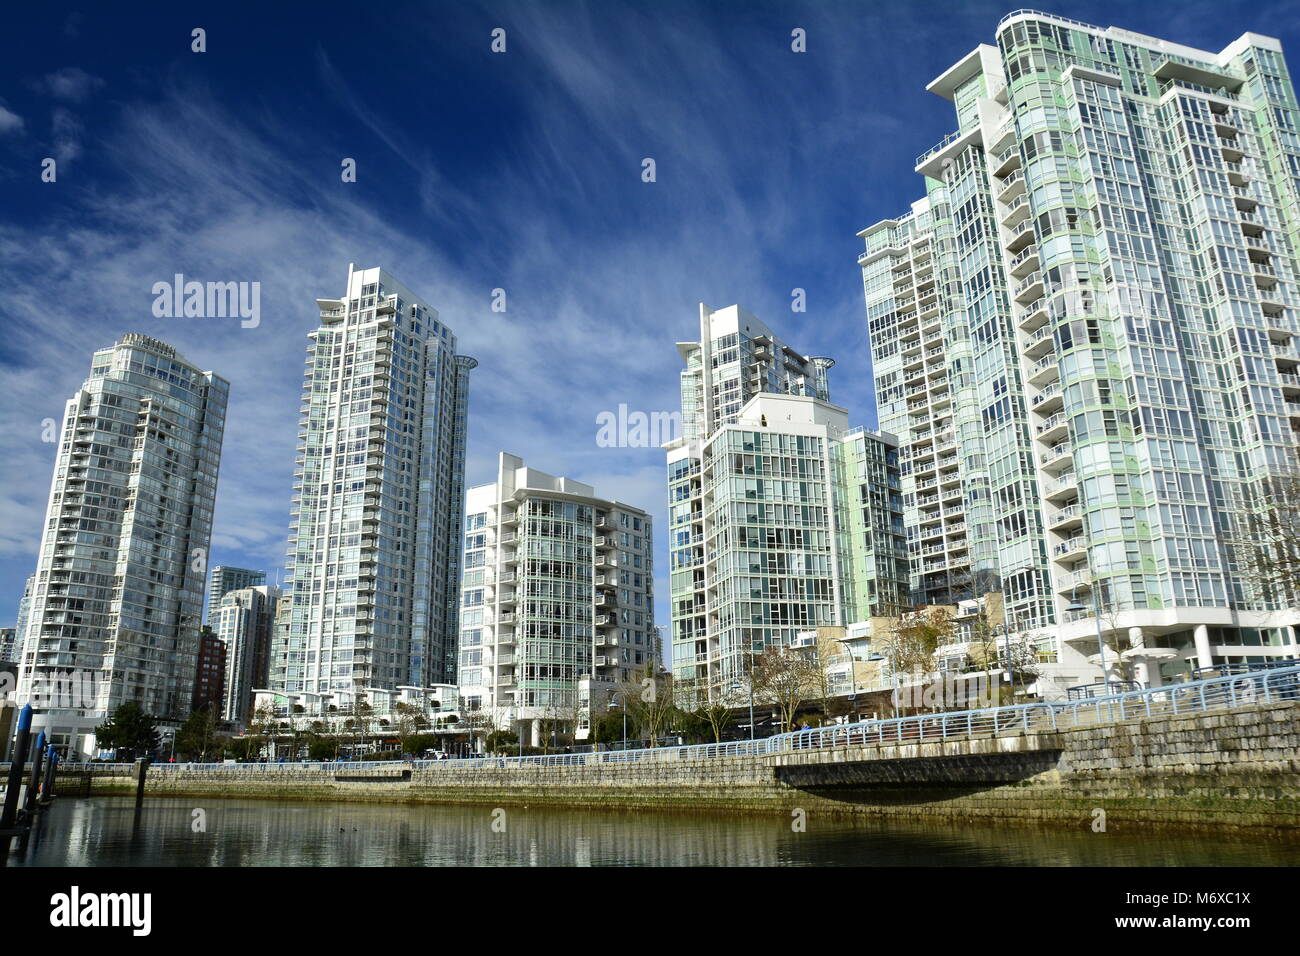 High end luxury real estate in Yaletown district of Vancouver BC,Canada. Stock Photo